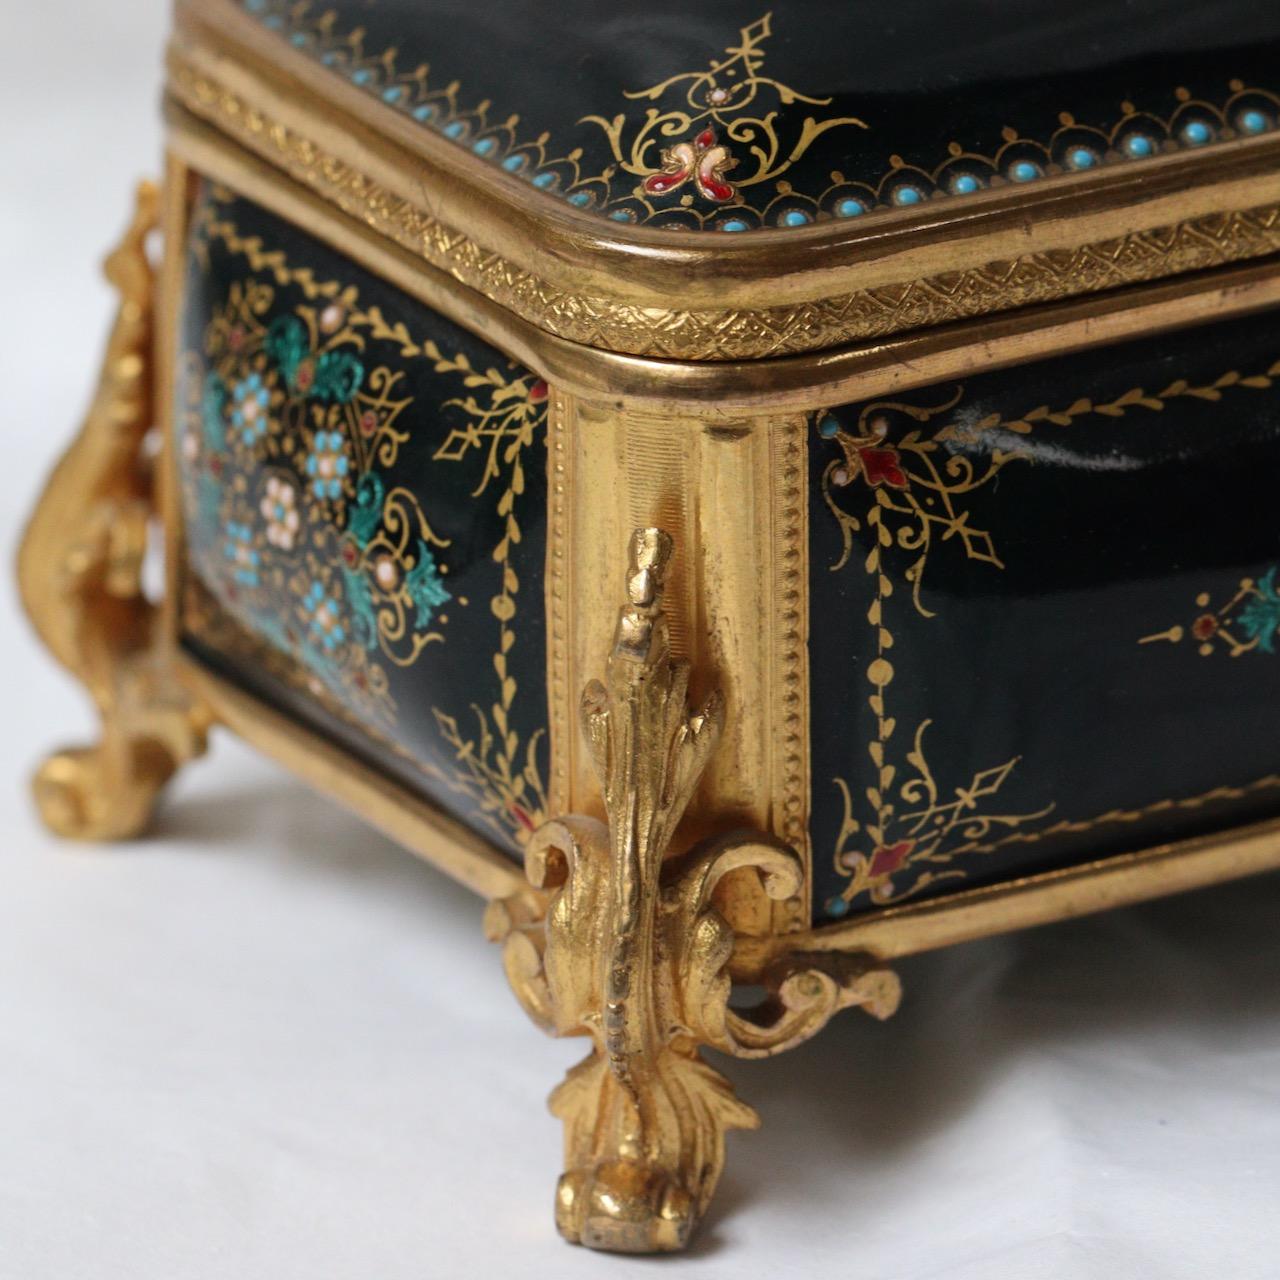 19th Century French Enamel and Ormolu-Mounted Jewelry Casket 3